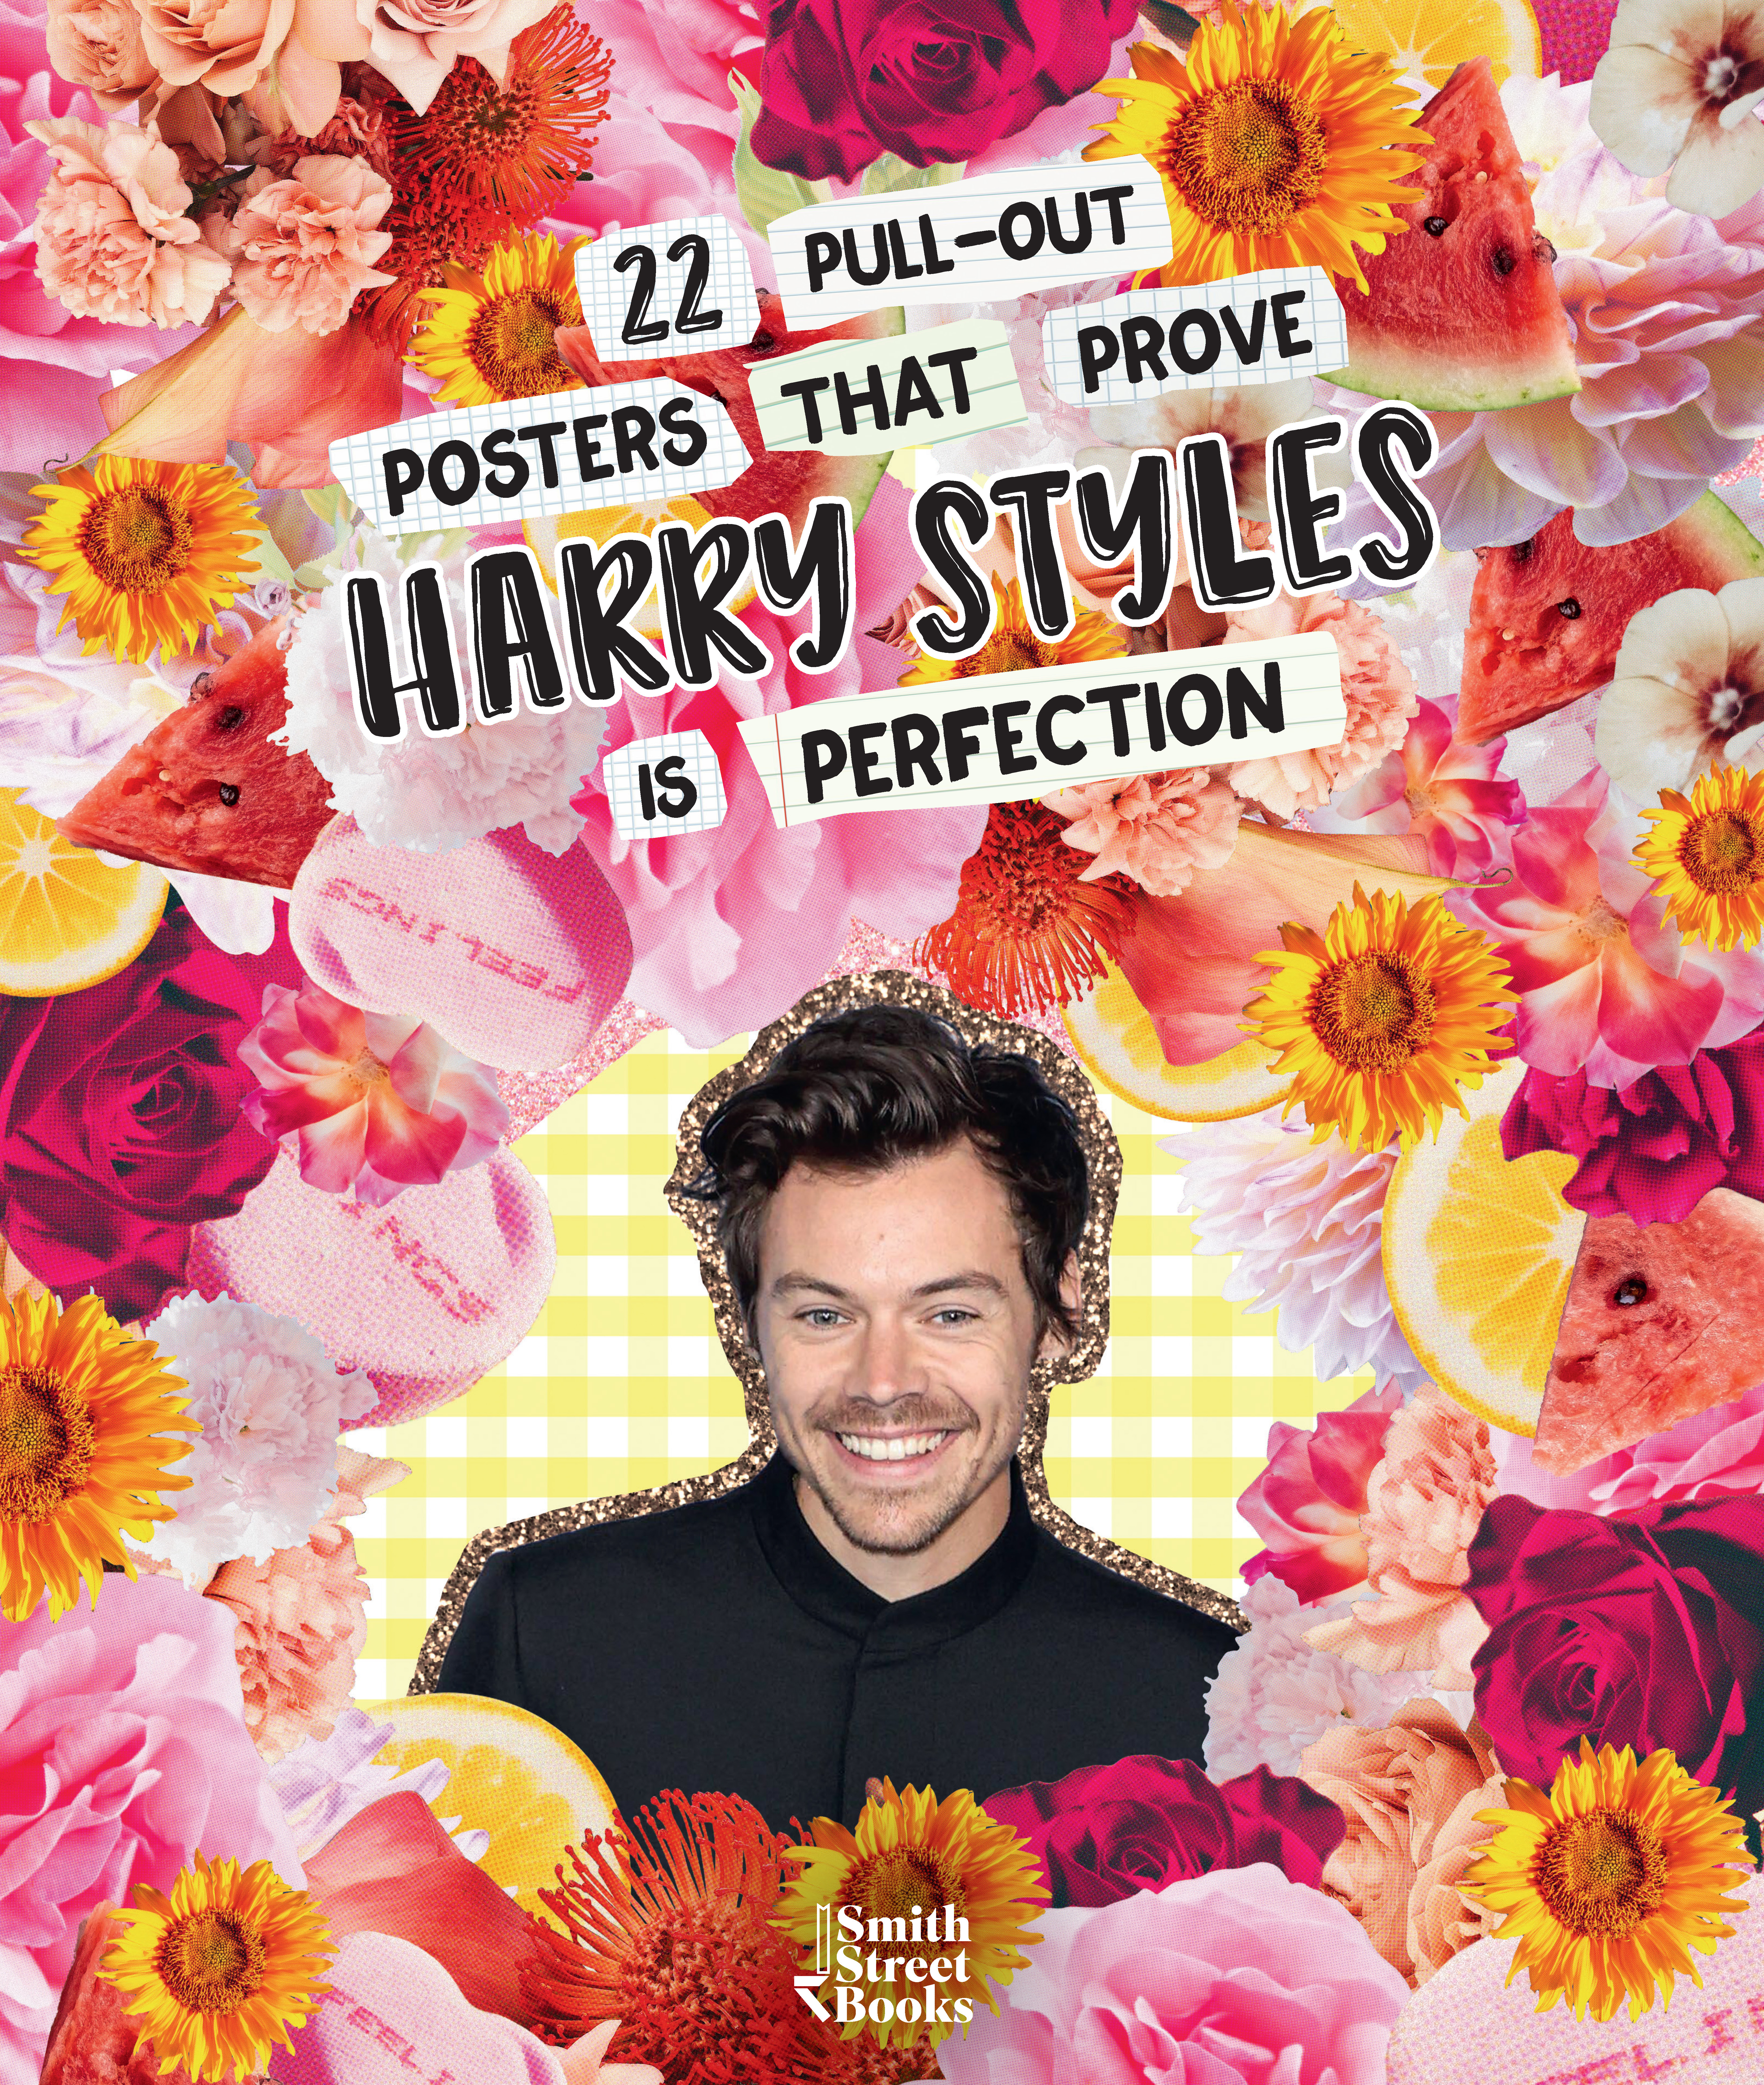 22 Pull-out Posters that prove Harry Styles is Perfection